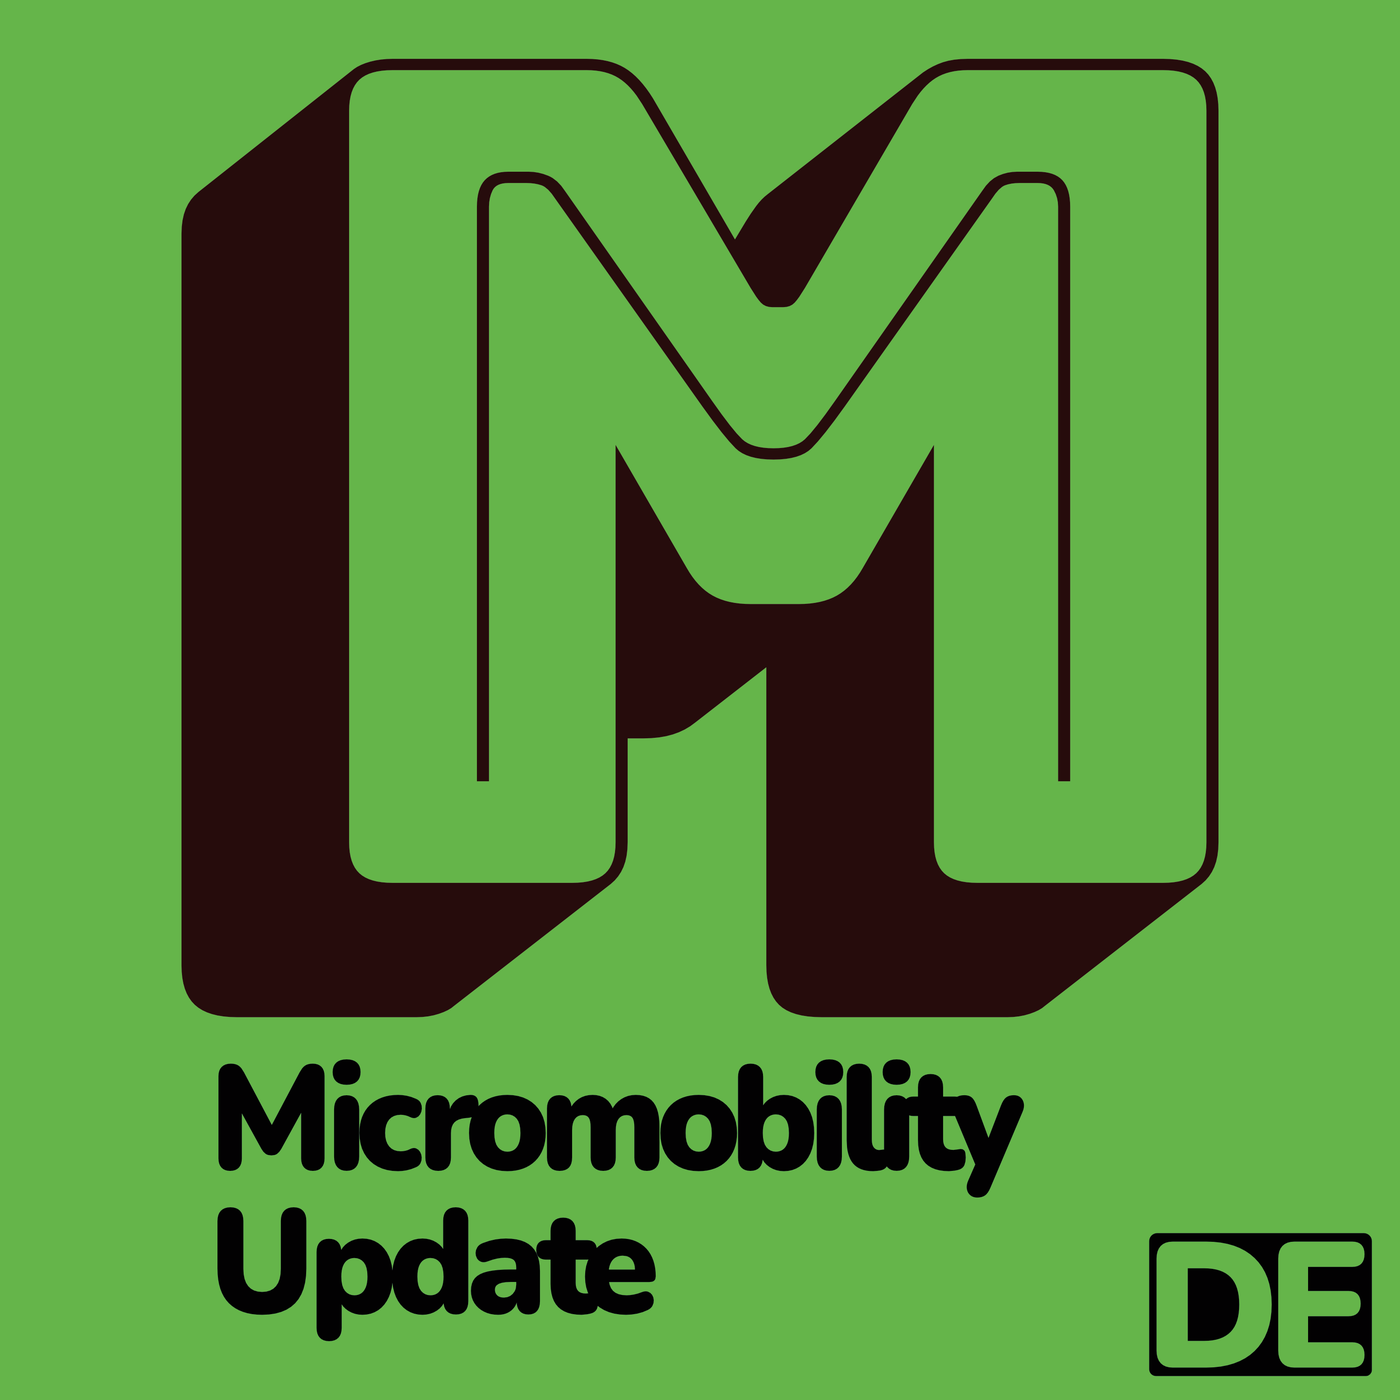 Do, 16.08. - Micromobility Update wieder am Donnerstag